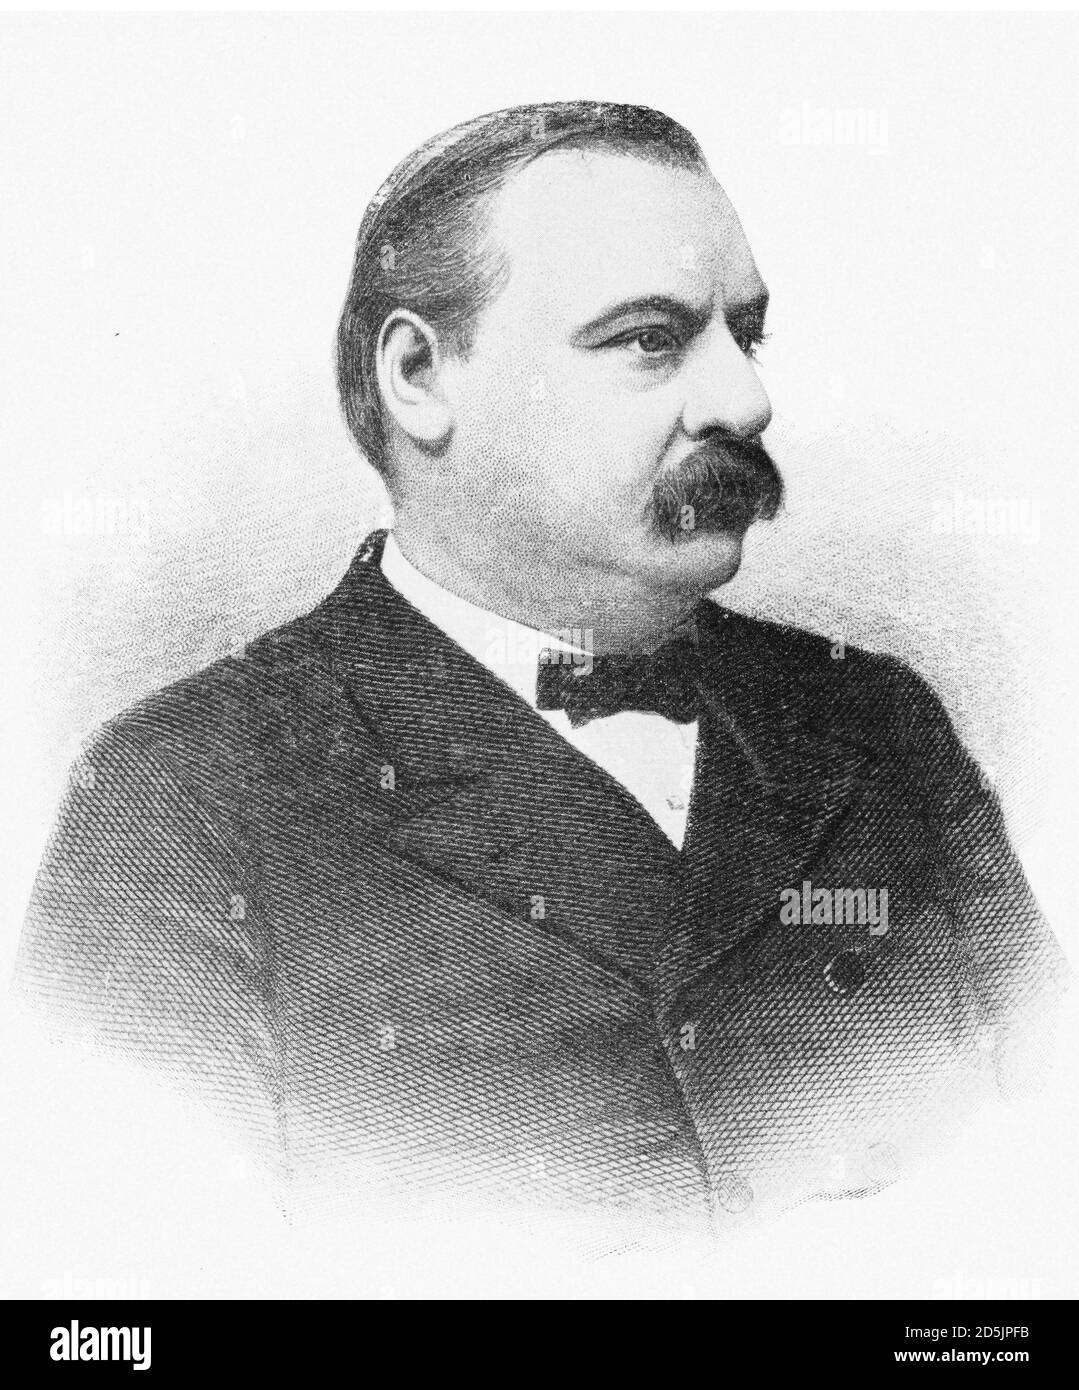 Portrait of president Grover Cleveland . Stephen Grover Cleveland (1837 – 1908) was an American politician and lawyer who was the 22nd and 24th presid Stock Photo